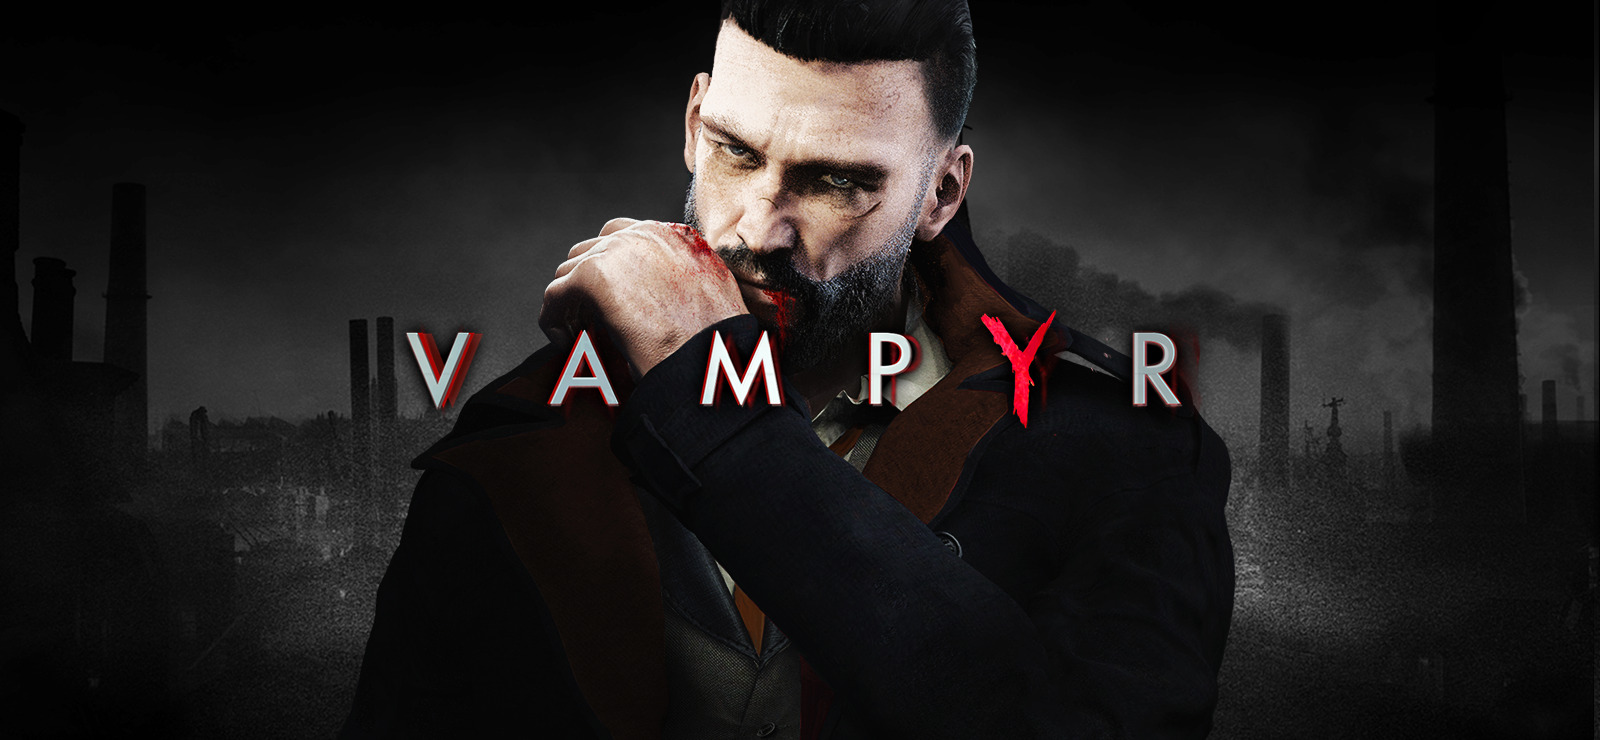 Vampyr is currently free on the Epic Games Store